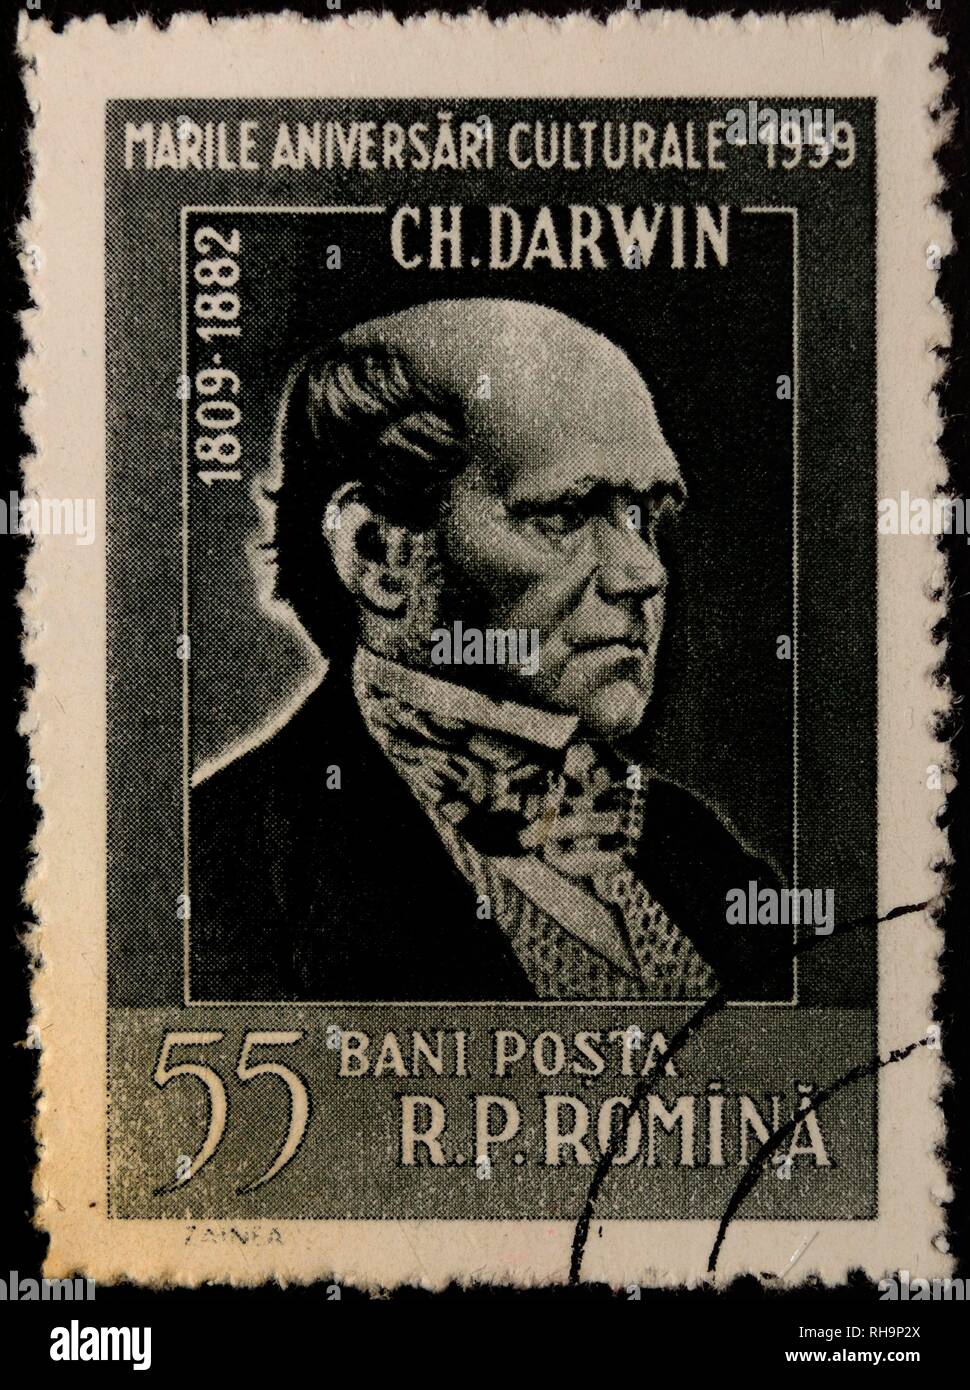 Charles Darwin, an English naturalist, geologist and biologist, portrait on a Romanian stamp, Romania Stock Photo